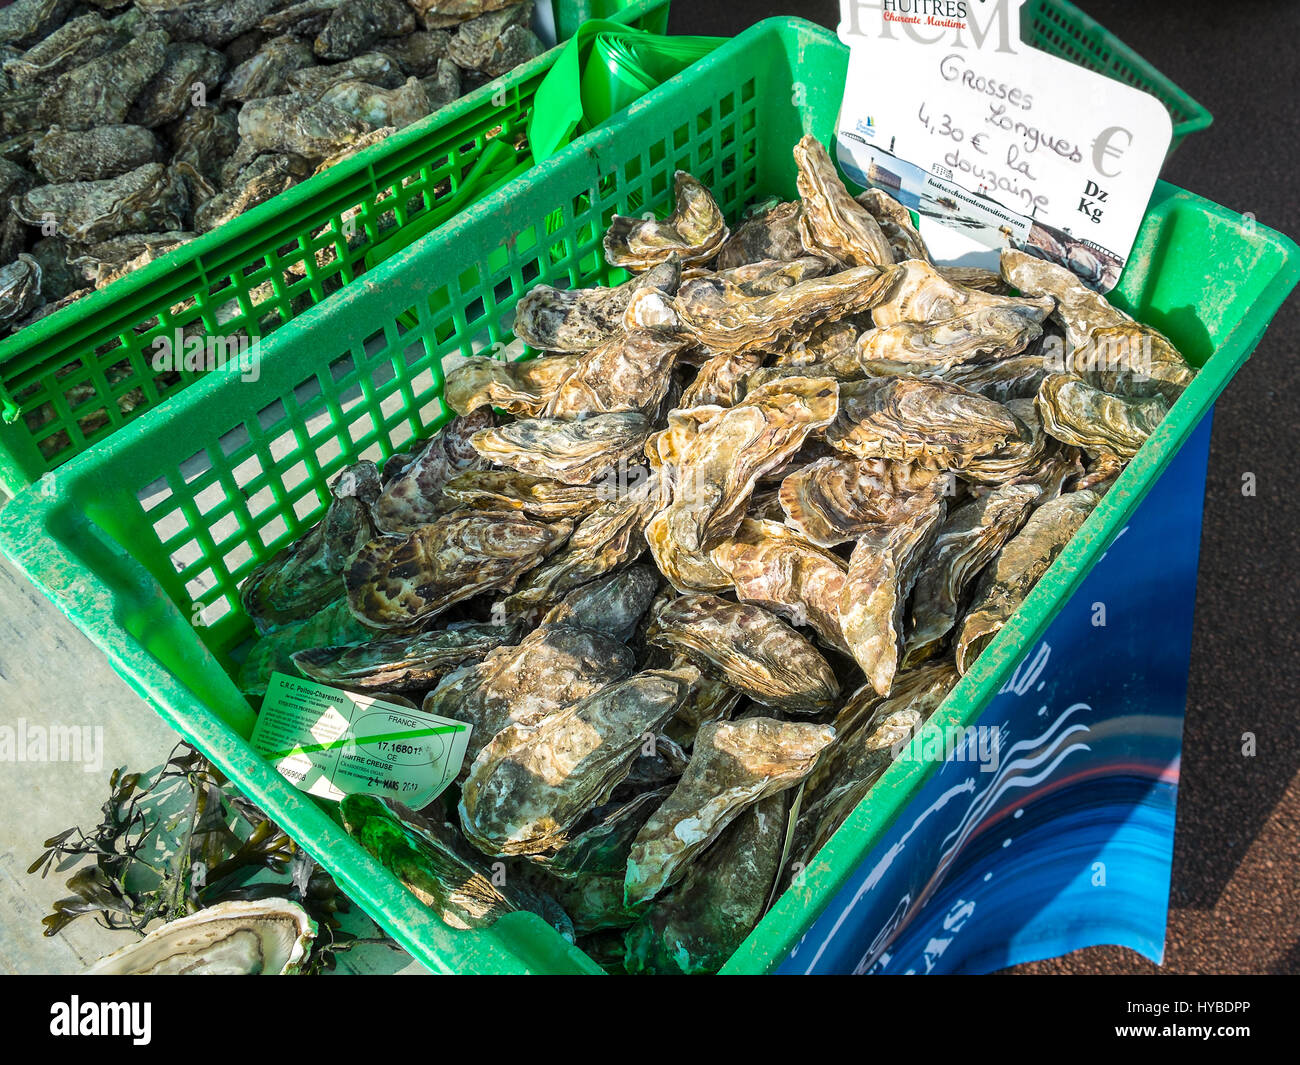 Fresh Atlantic Oysters on sale. Stock Photo